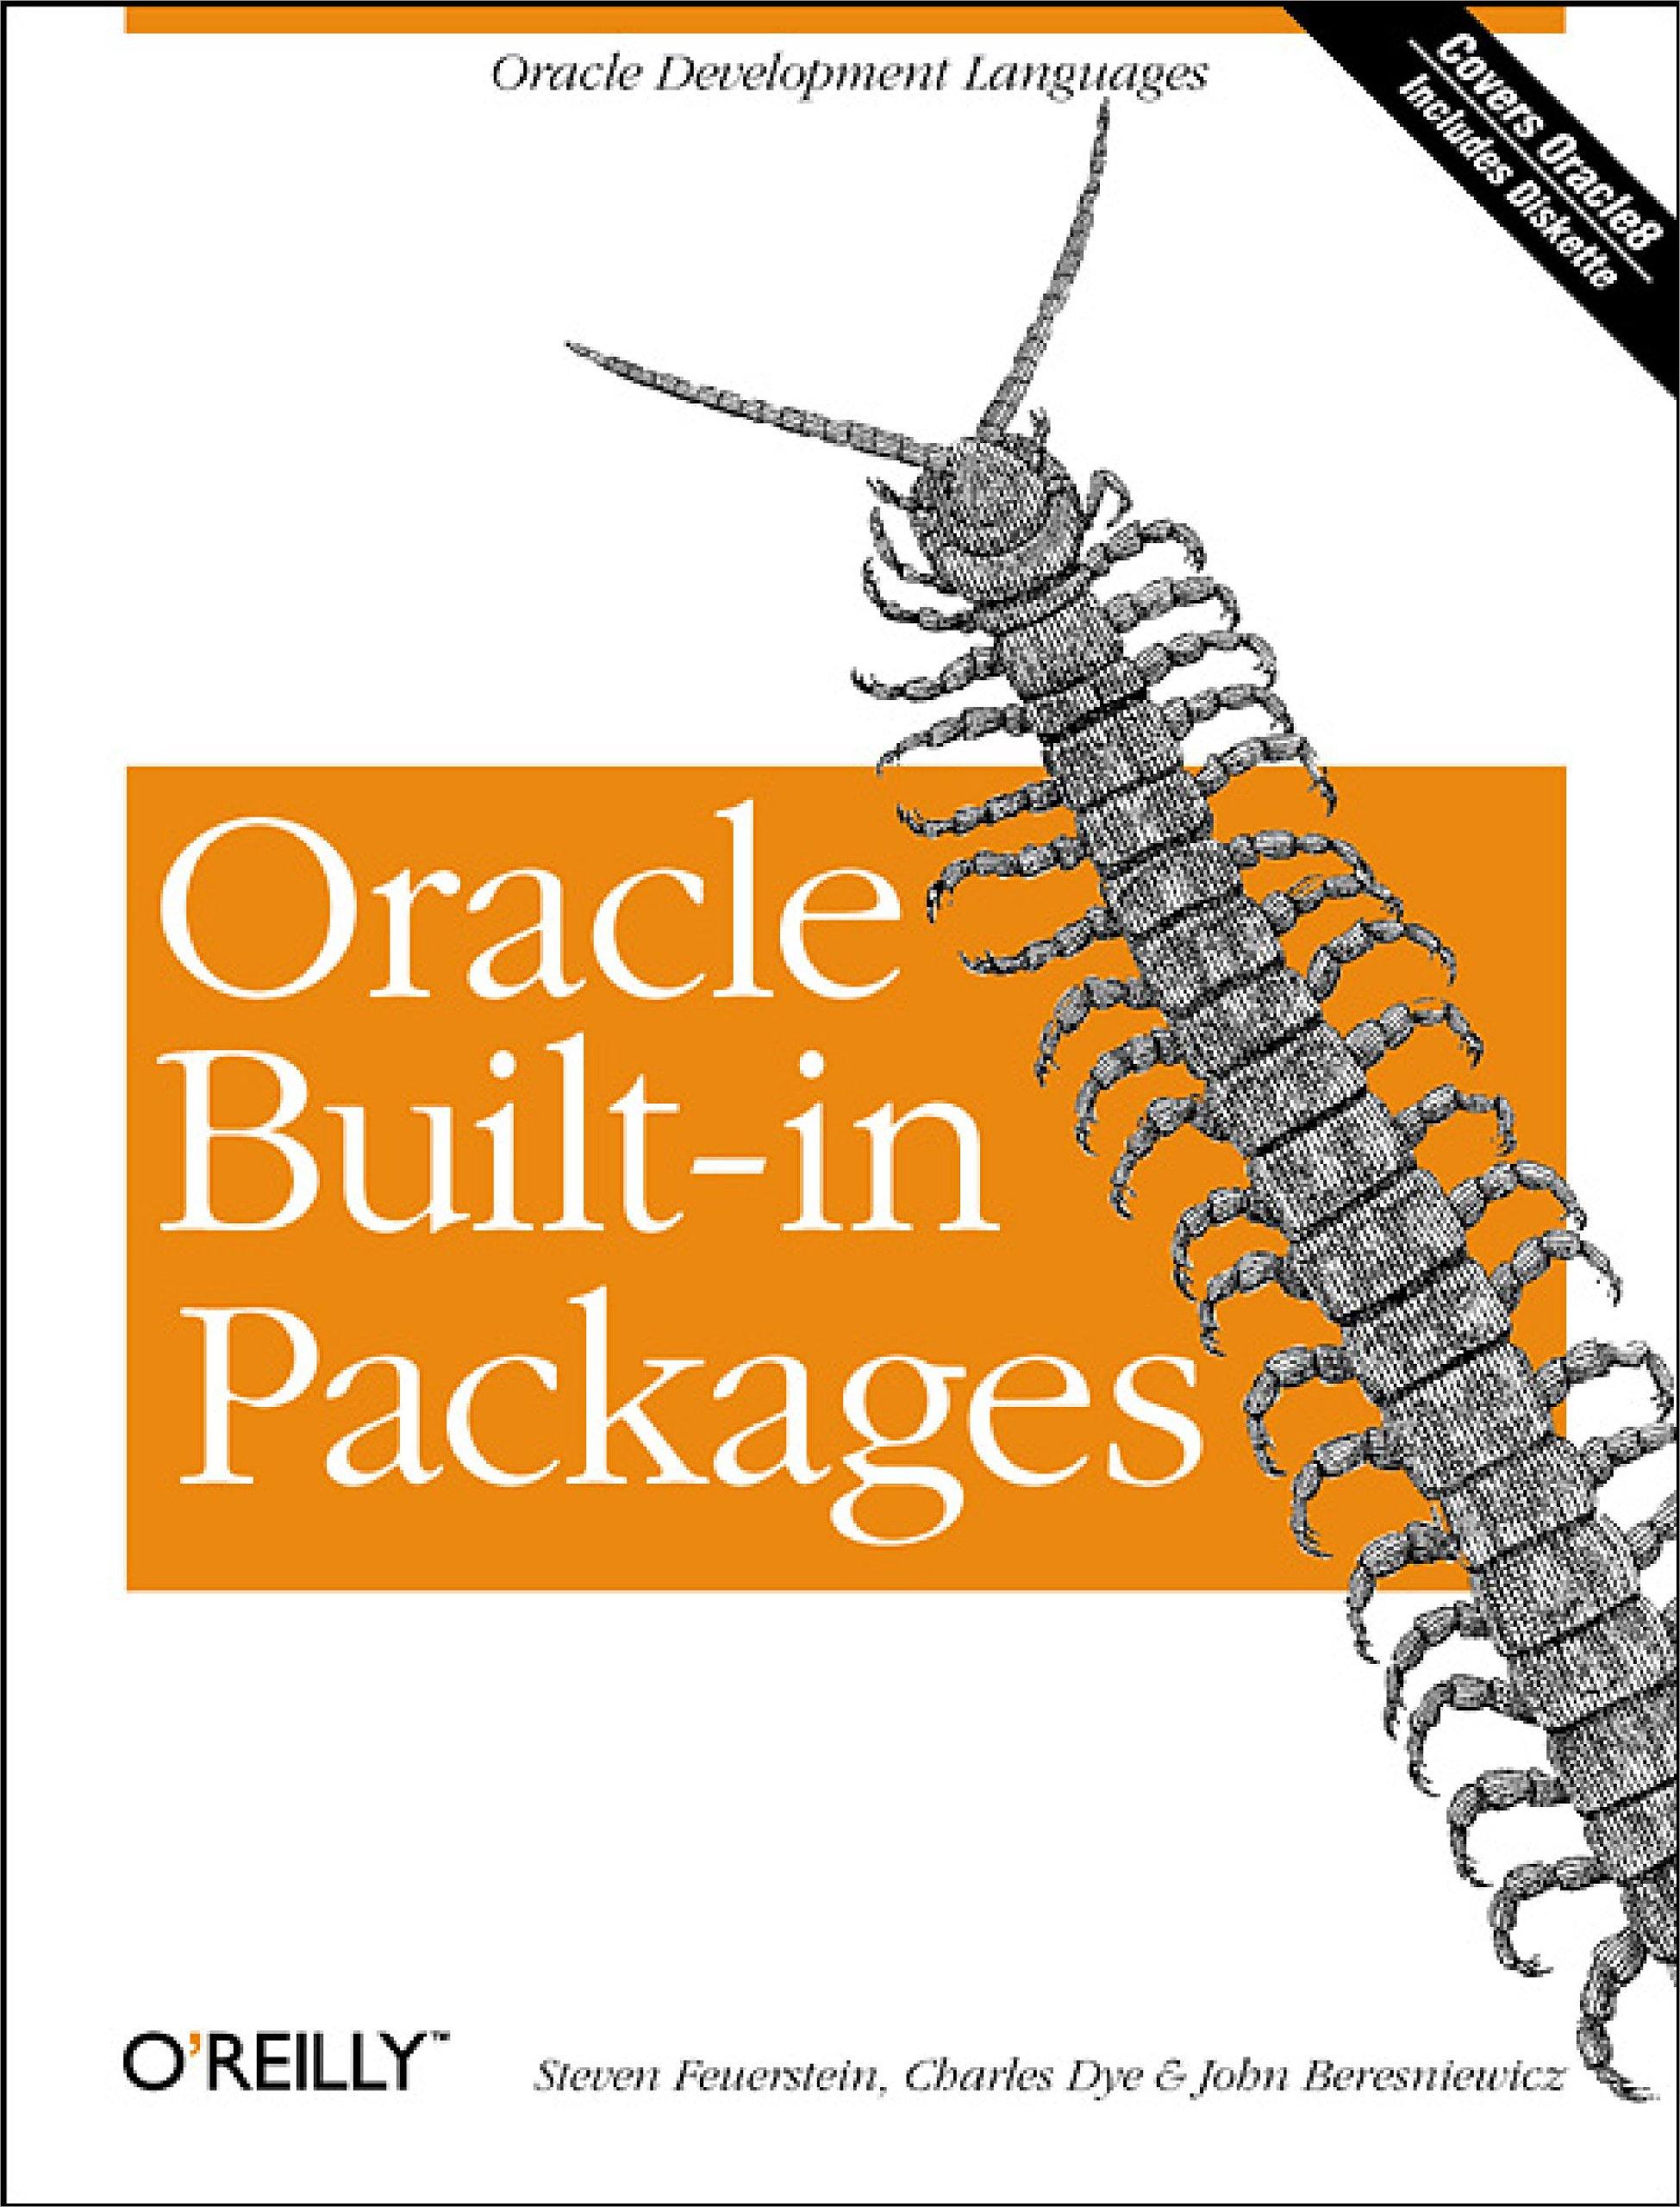 oracle built in packages oracle development languages 1st edition steven feuerstein, charles dye, john